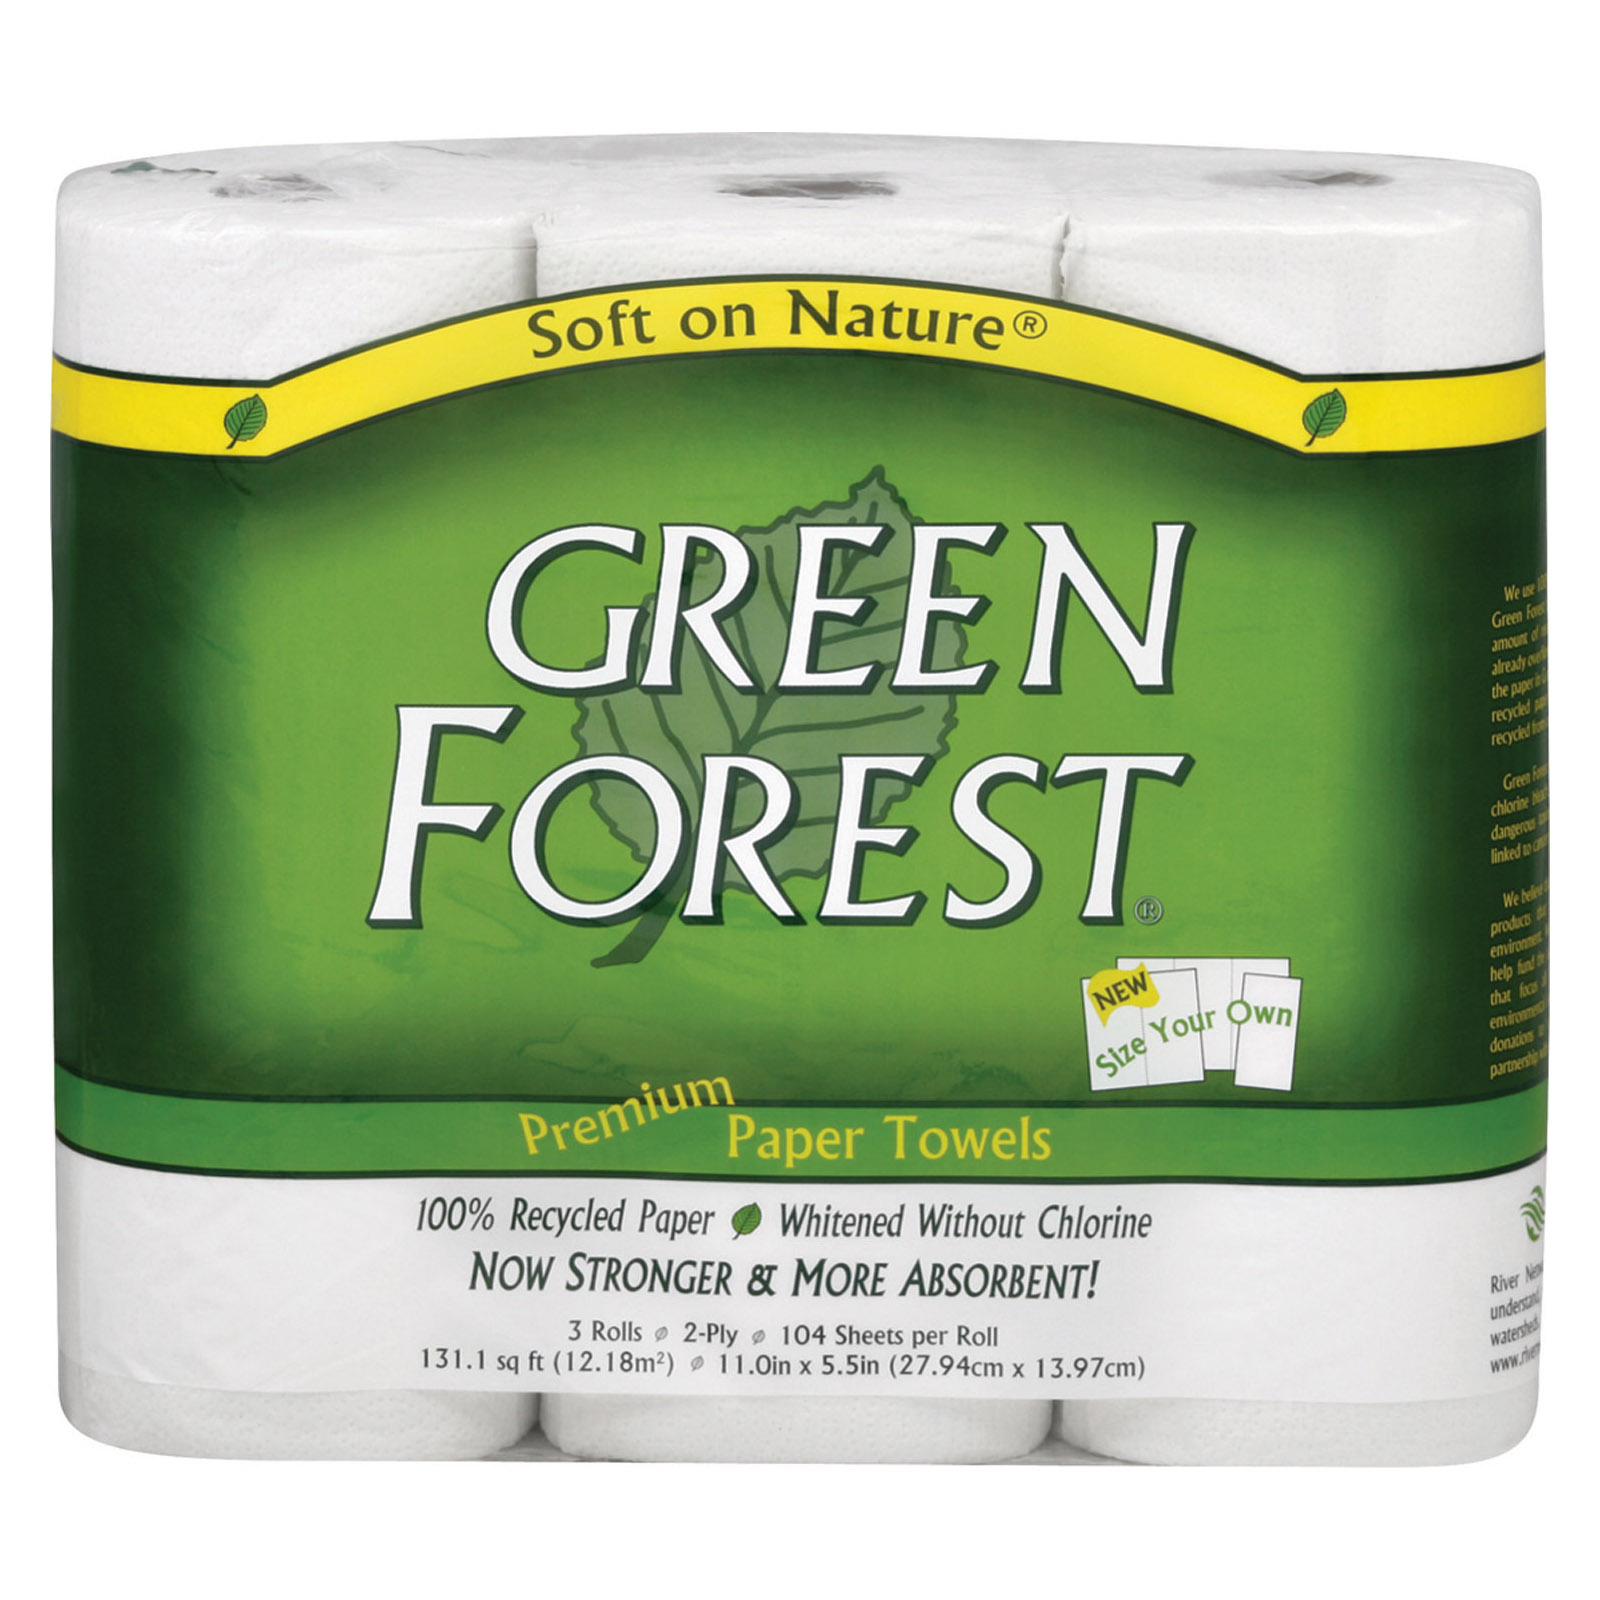 Green Forest Paper Towel Size Your Own (10x3 Pack)